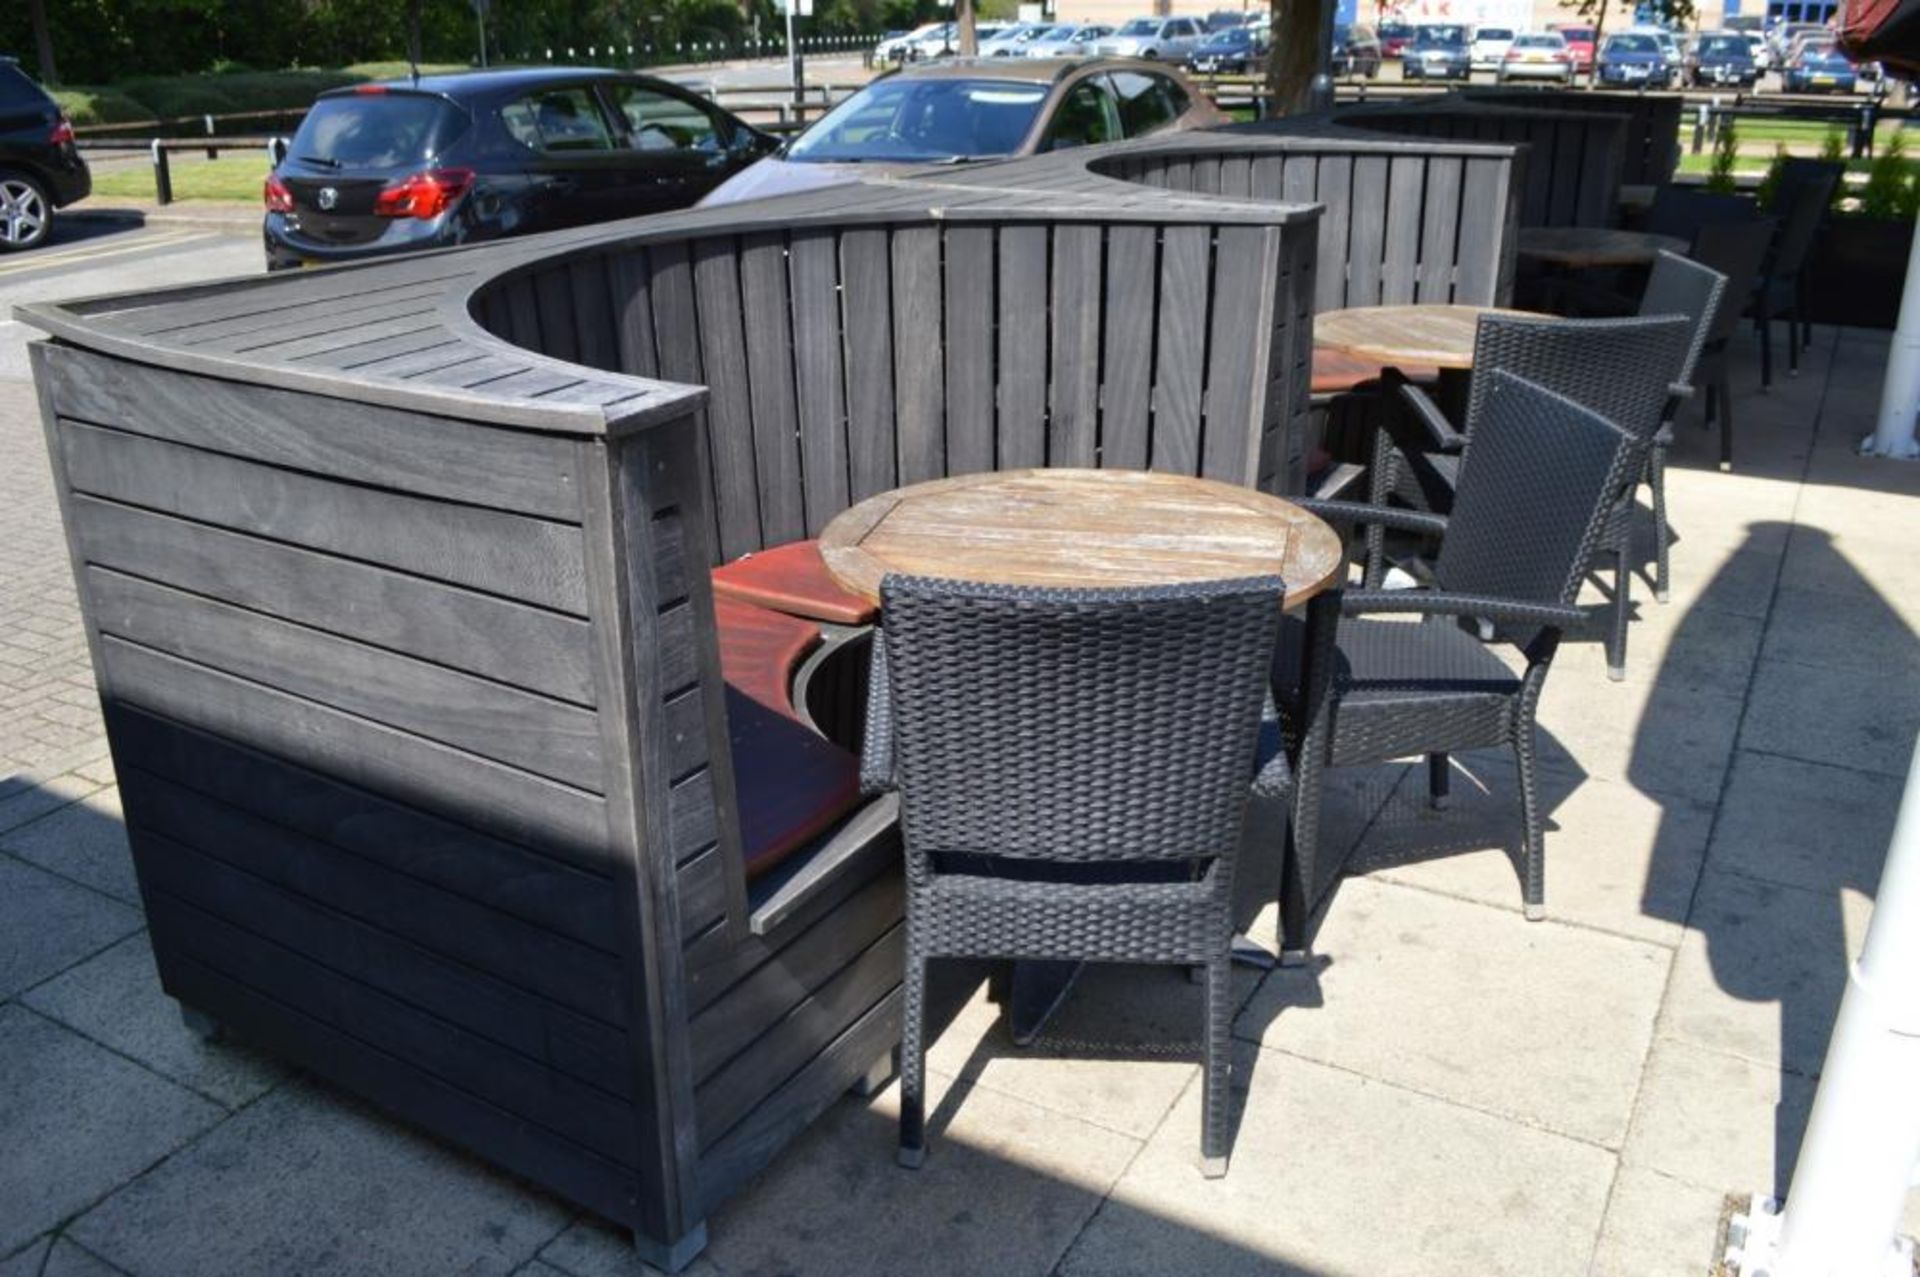 2 x Wooden Outdoor Seating Booths - Each Measure H111 x W203 x D106 cms - CL390 - Location: